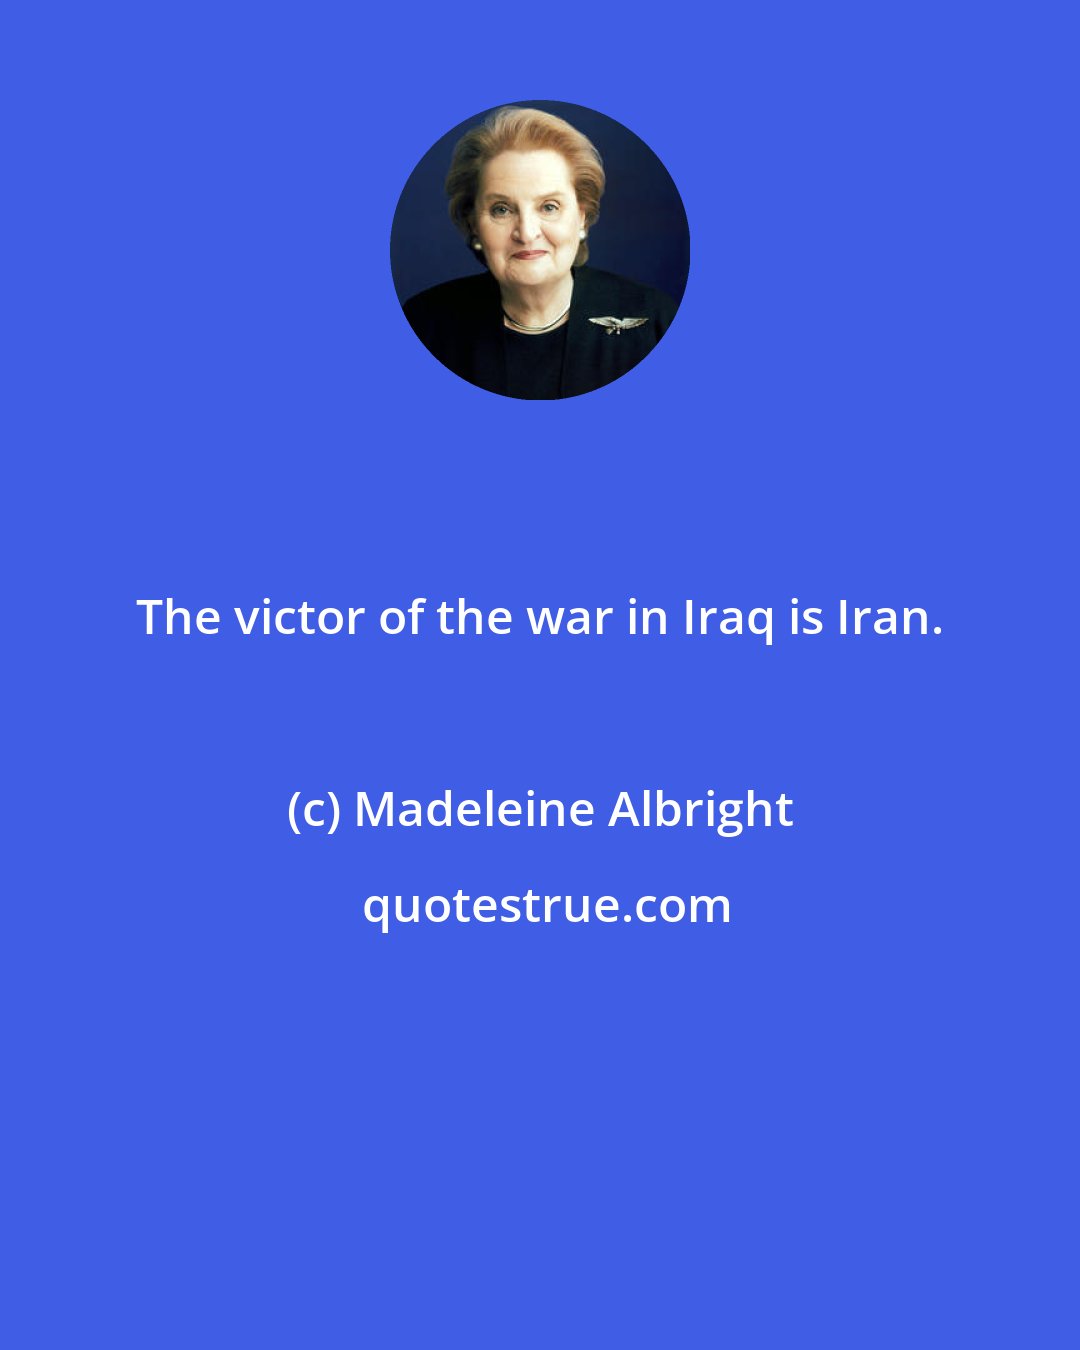 Madeleine Albright: The victor of the war in Iraq is Iran.